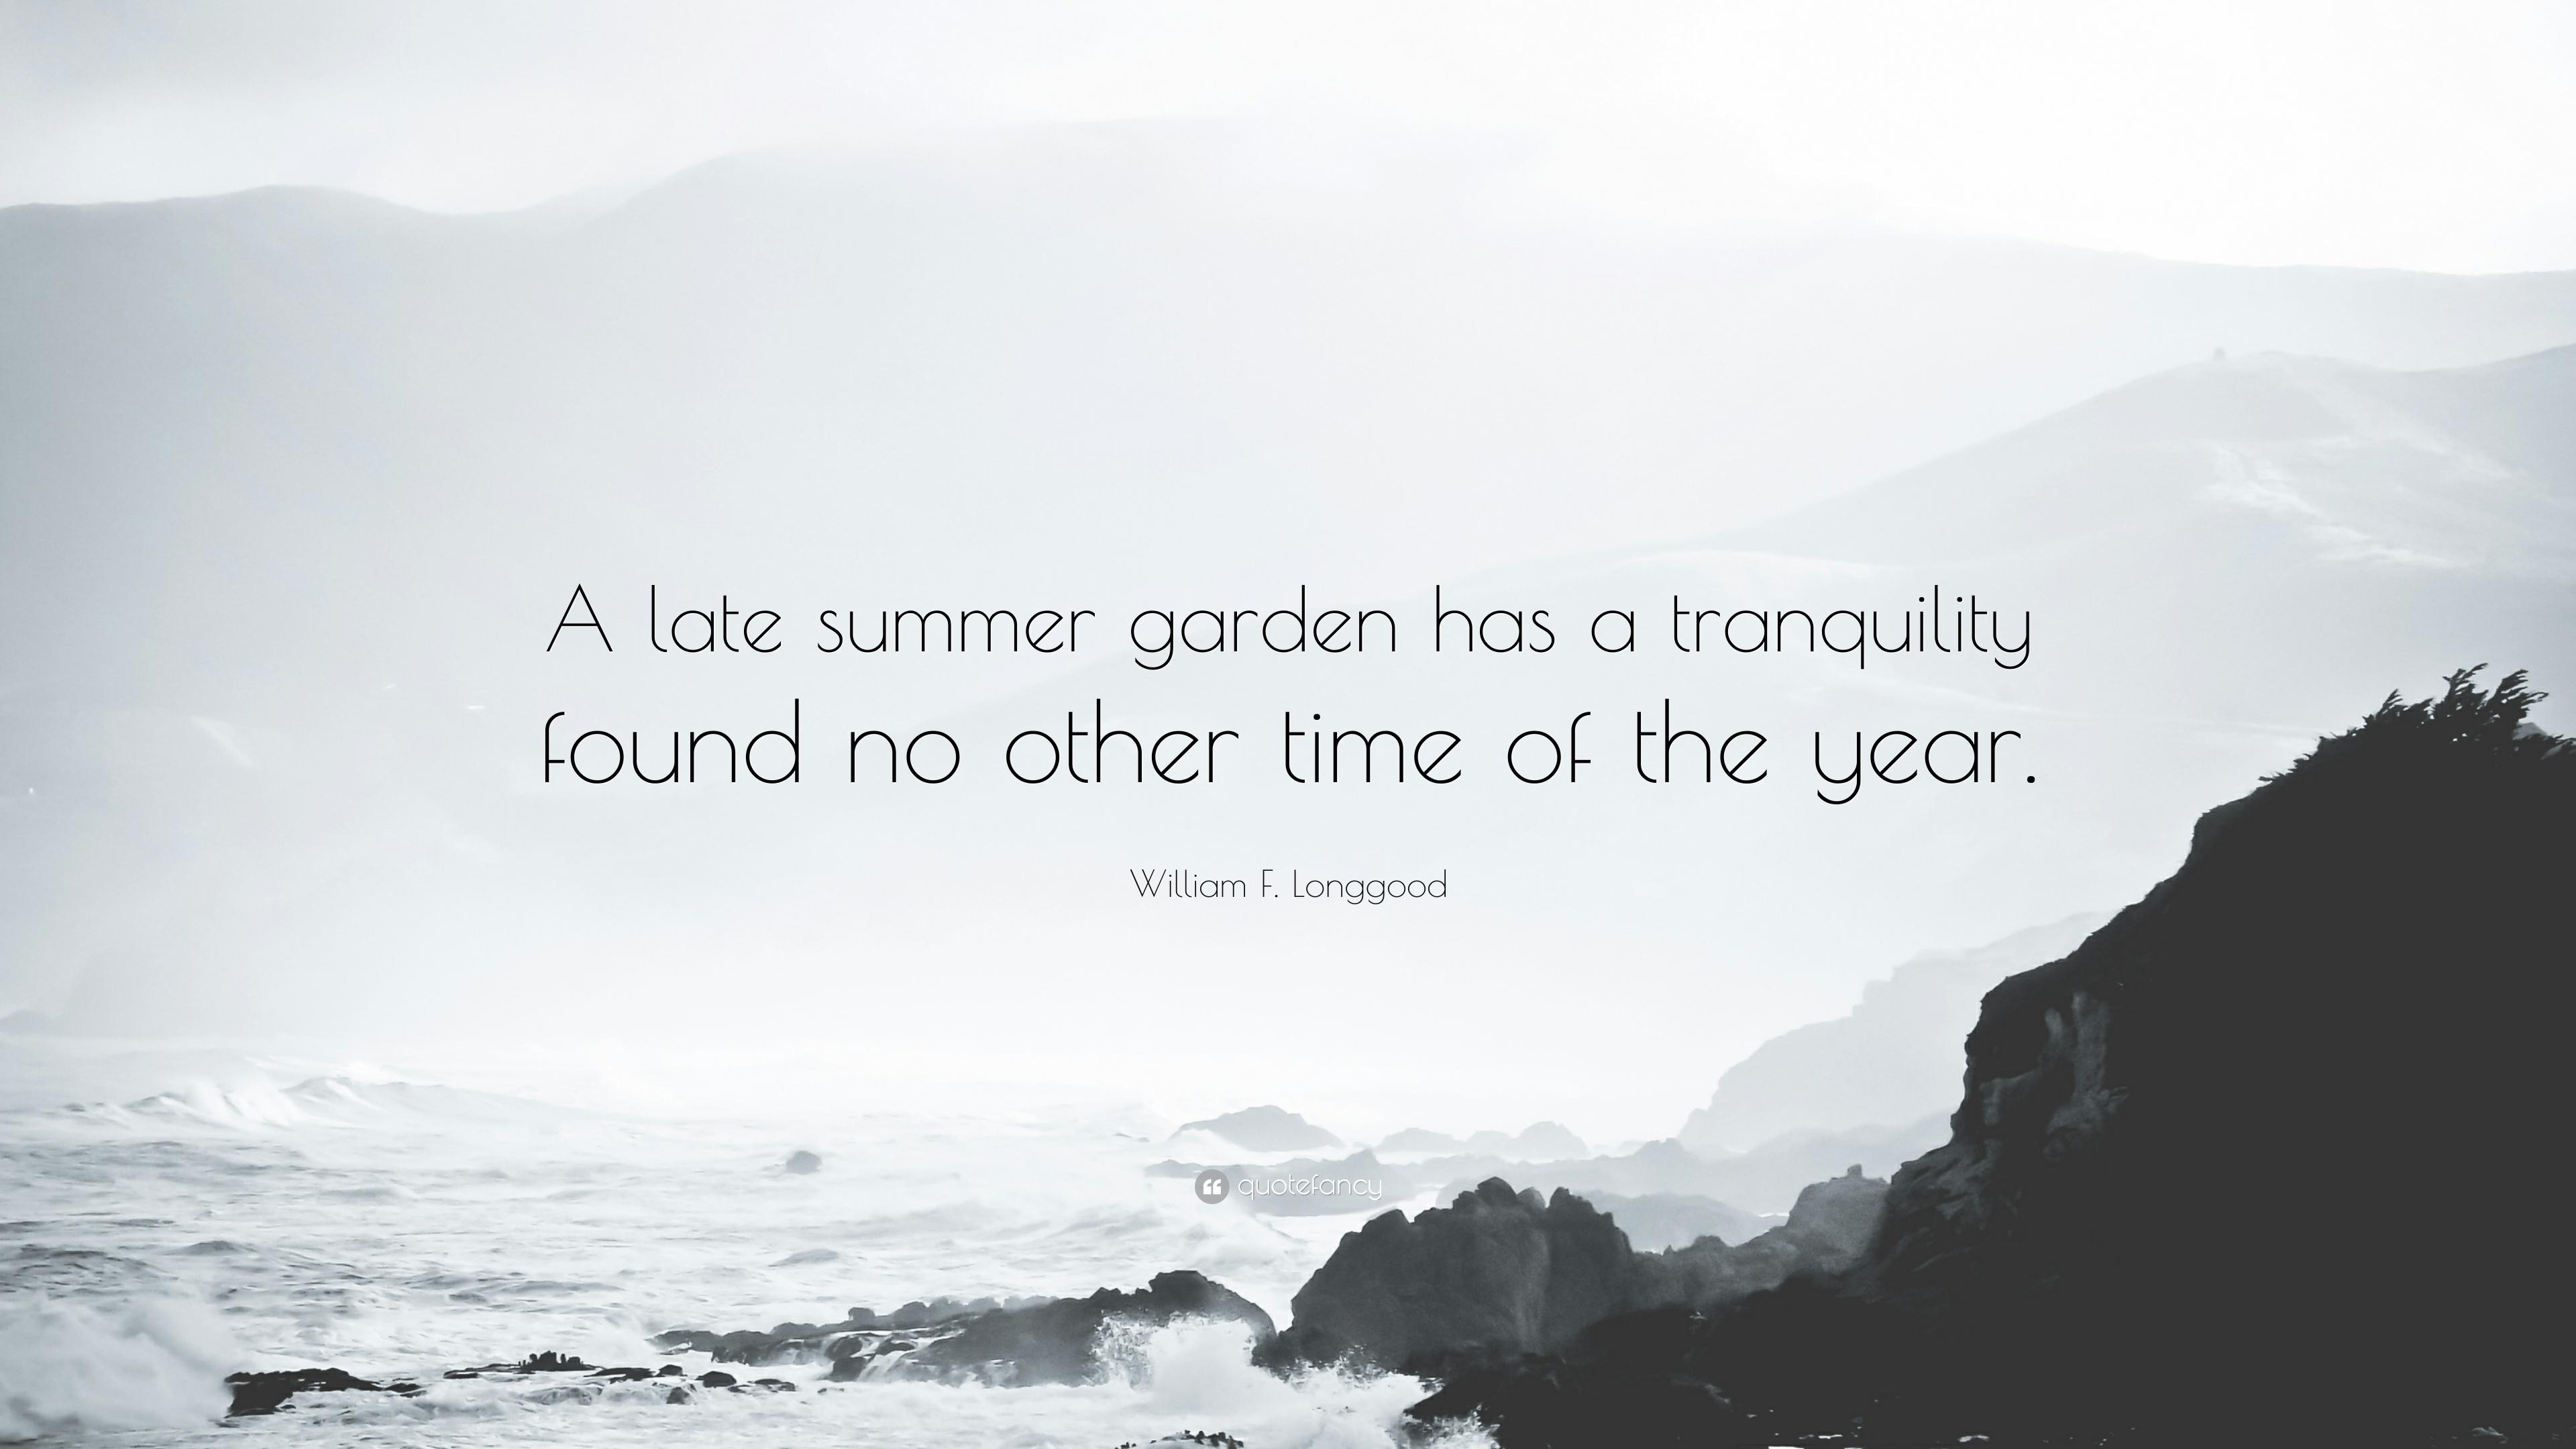 William F. Longgood Quote: “A late summer garden has a tranquility